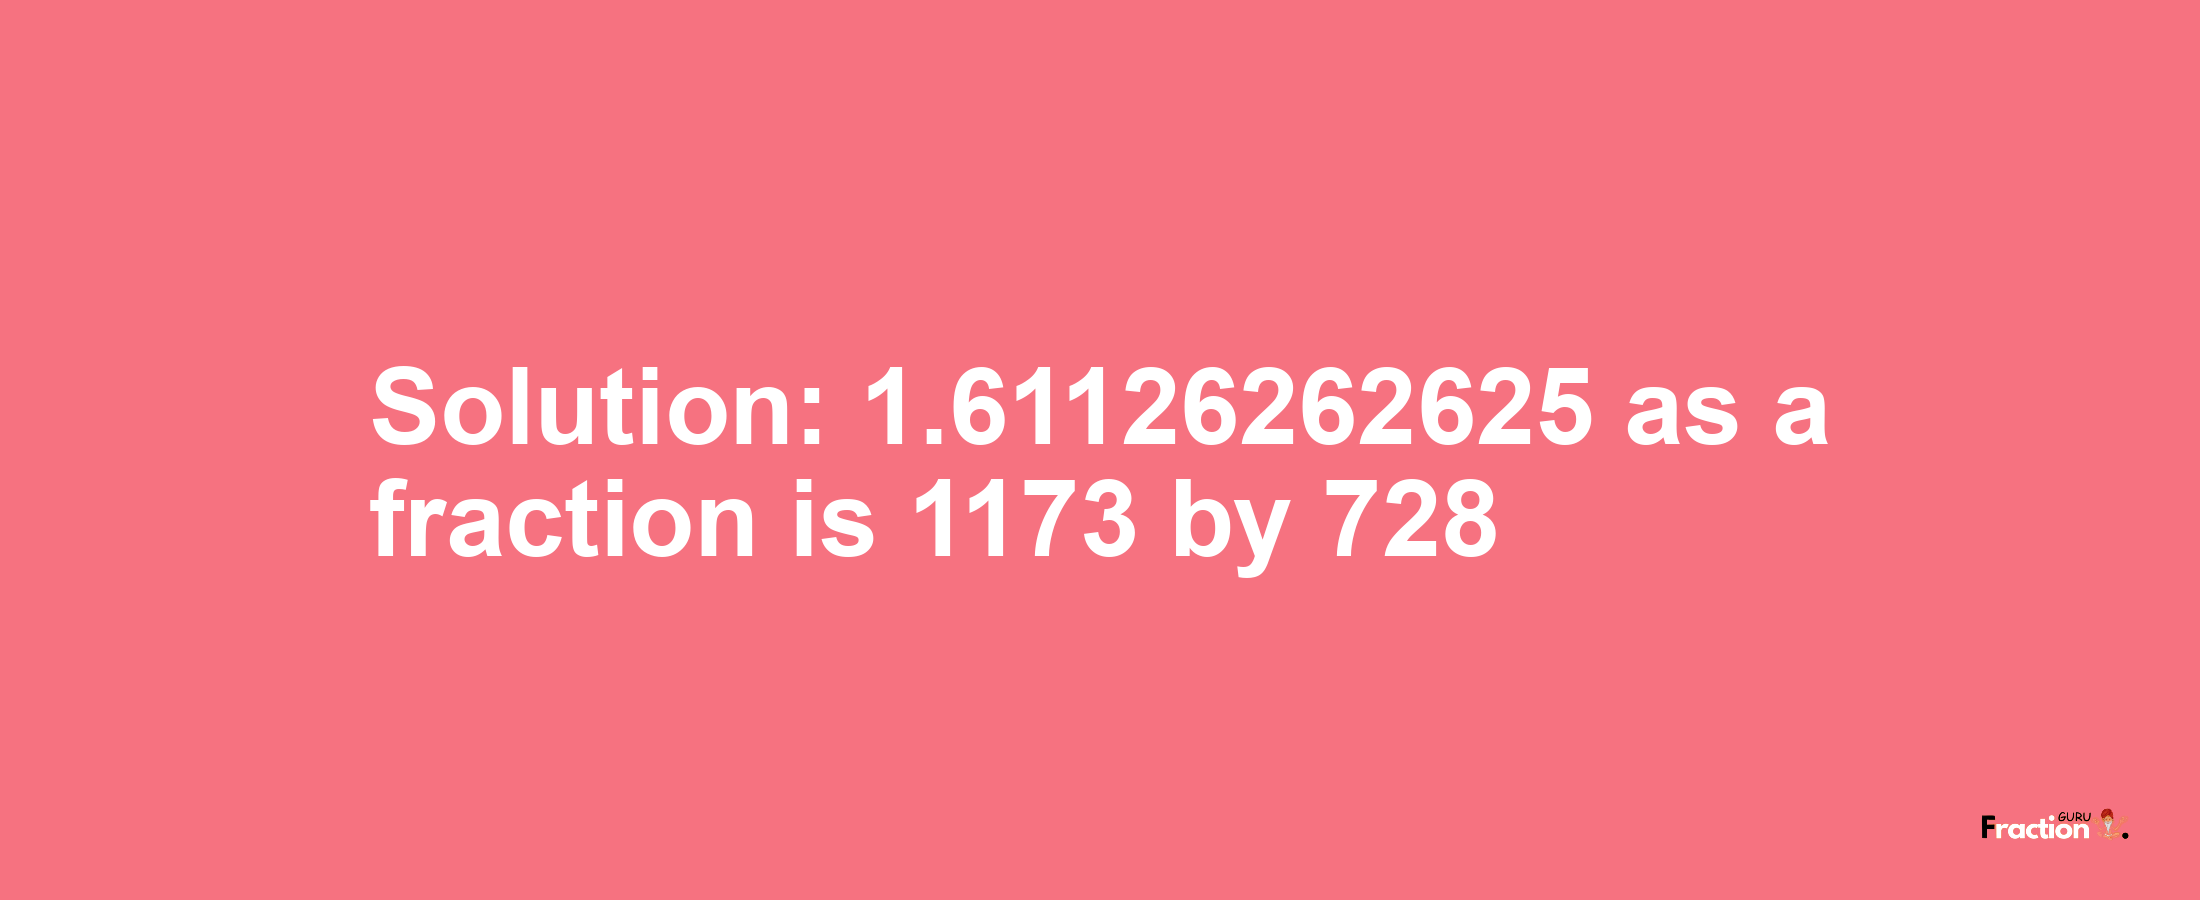 Solution:1.61126262625 as a fraction is 1173/728